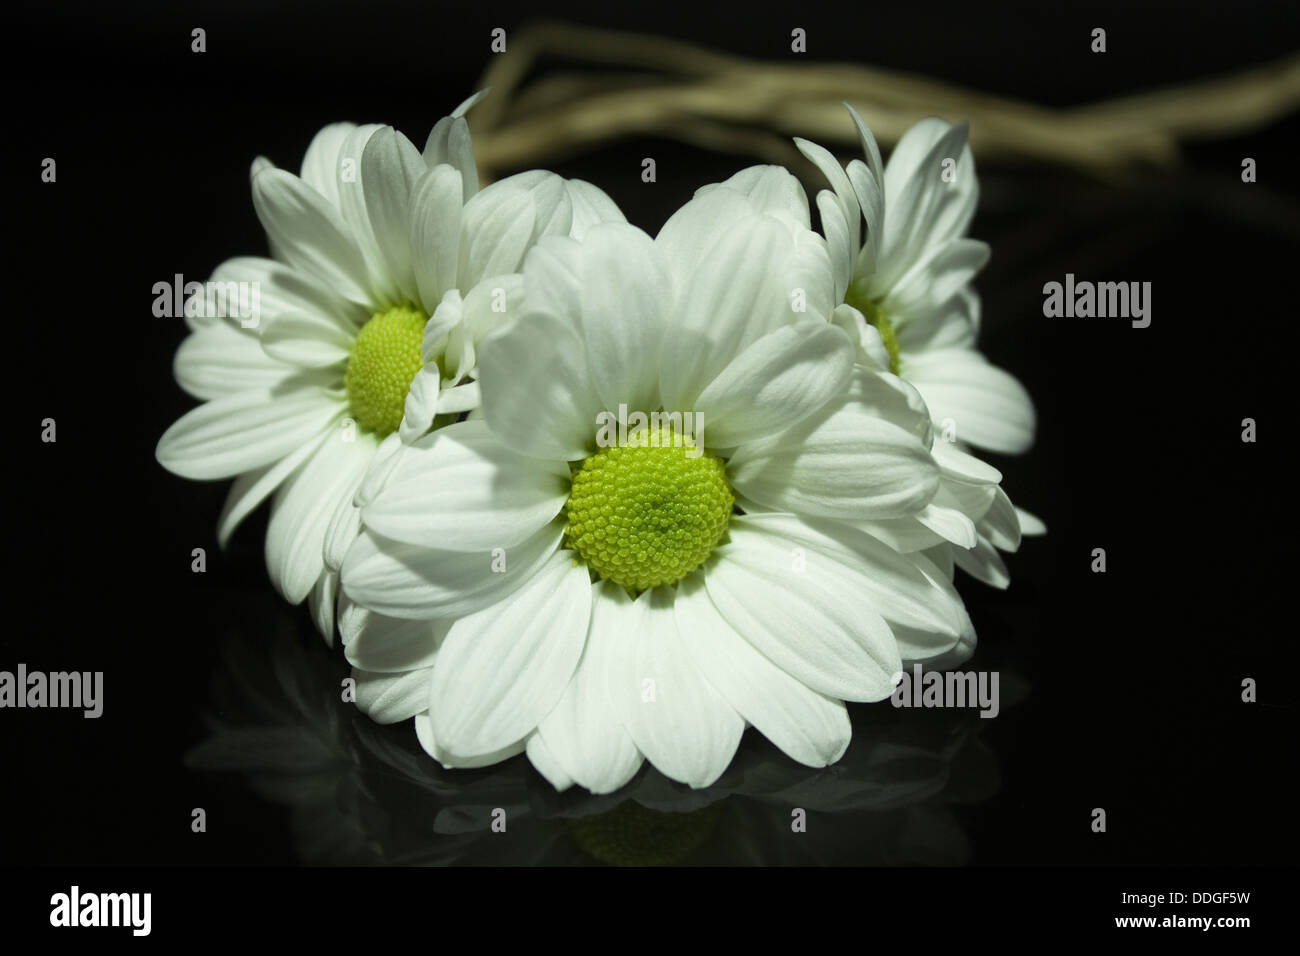 Three daisies flowers on black background and reflections. Stock Photo